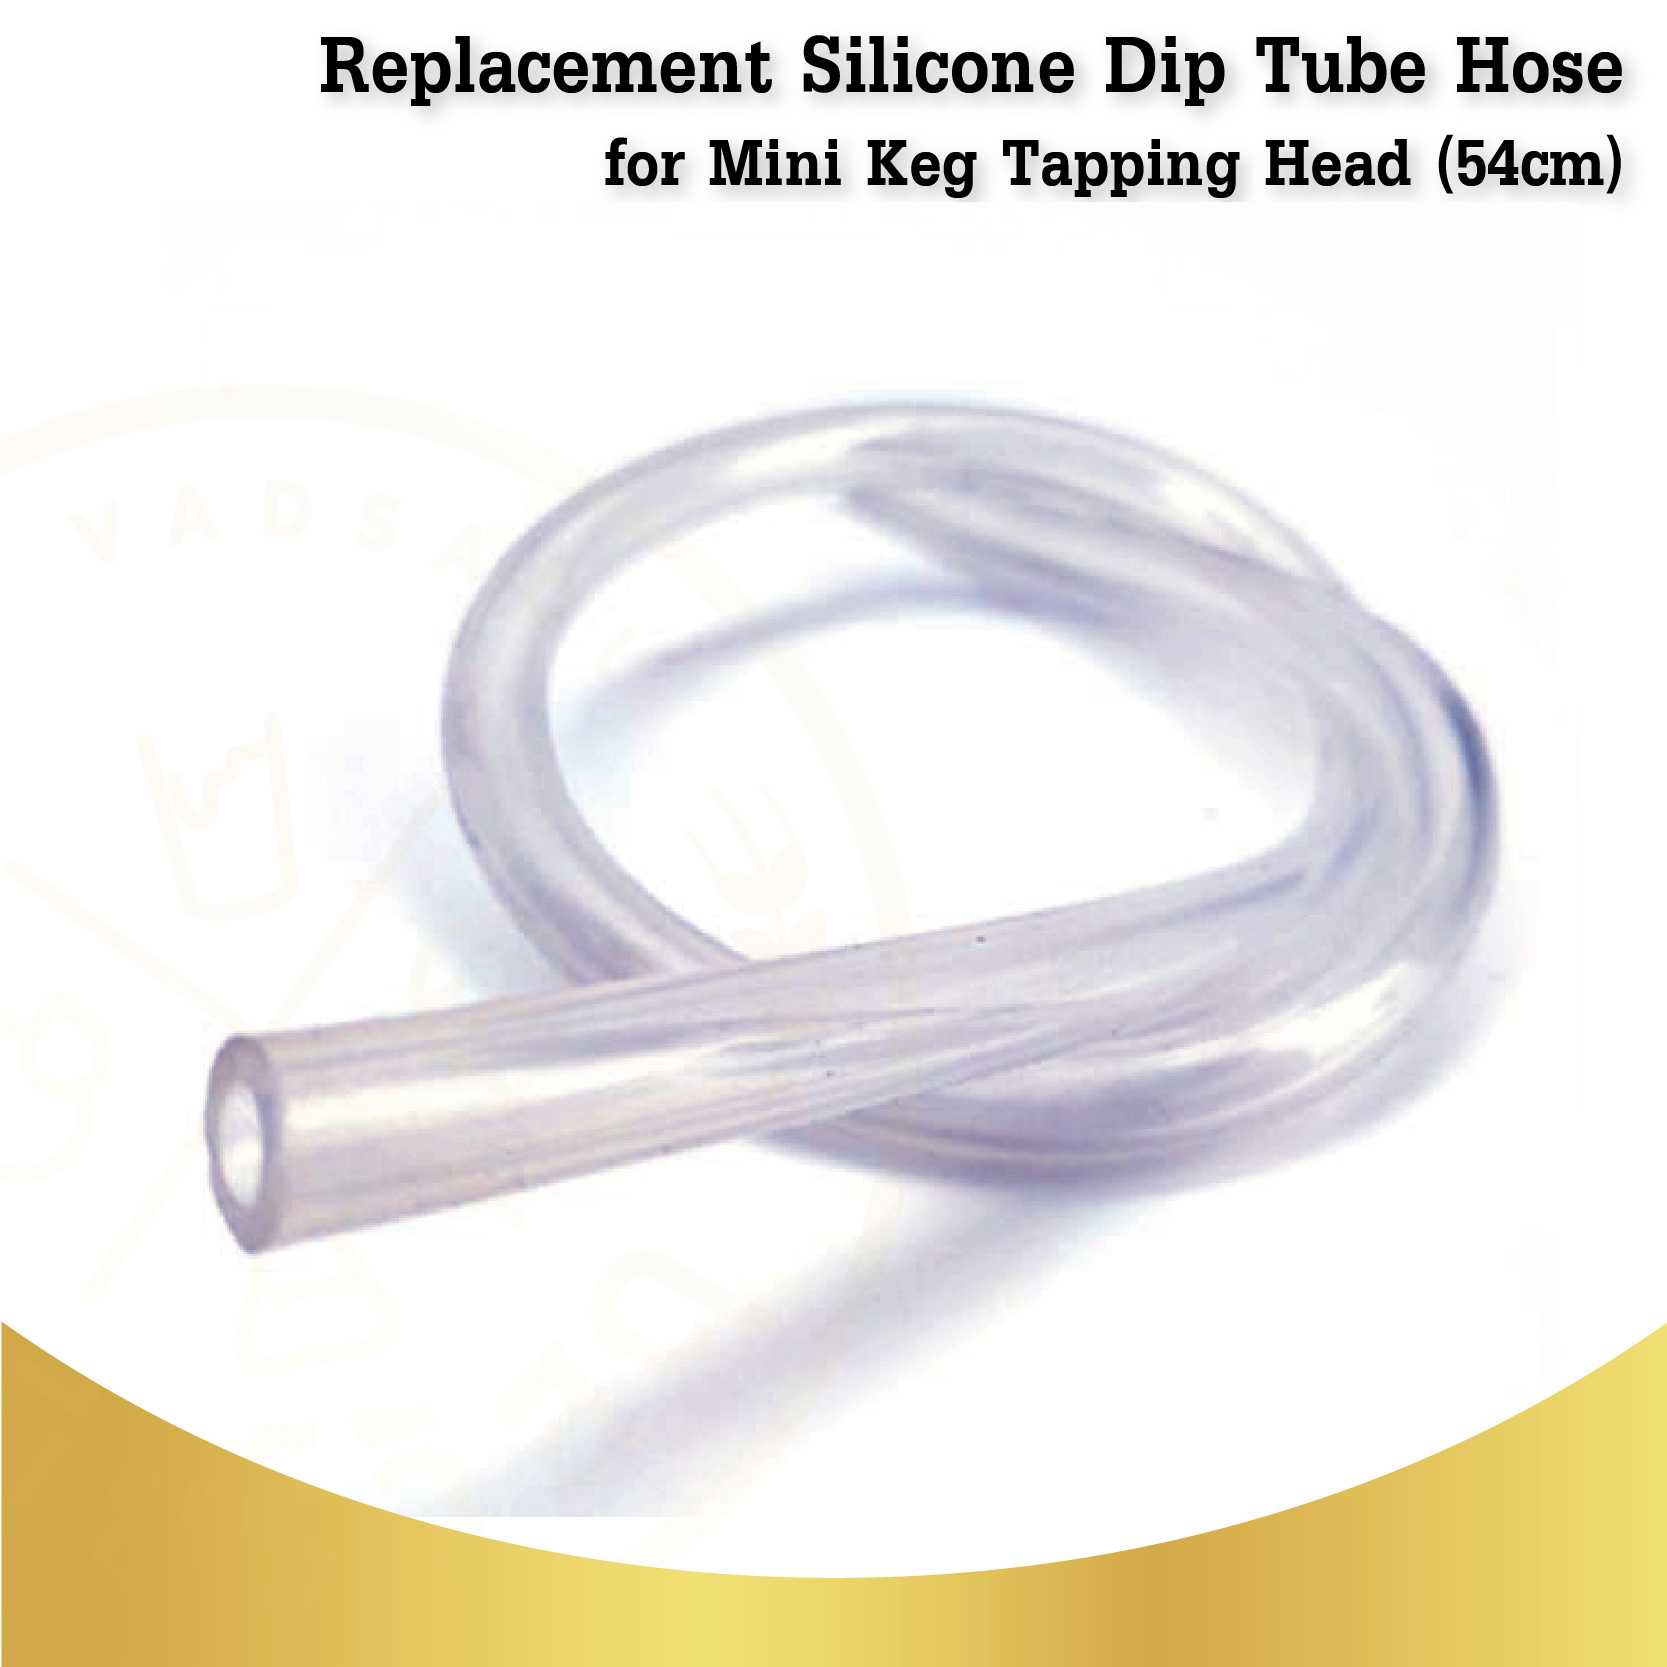 Replacement Silicone Dip Tube Hose for Mini Keg Tapping Head (54cm)